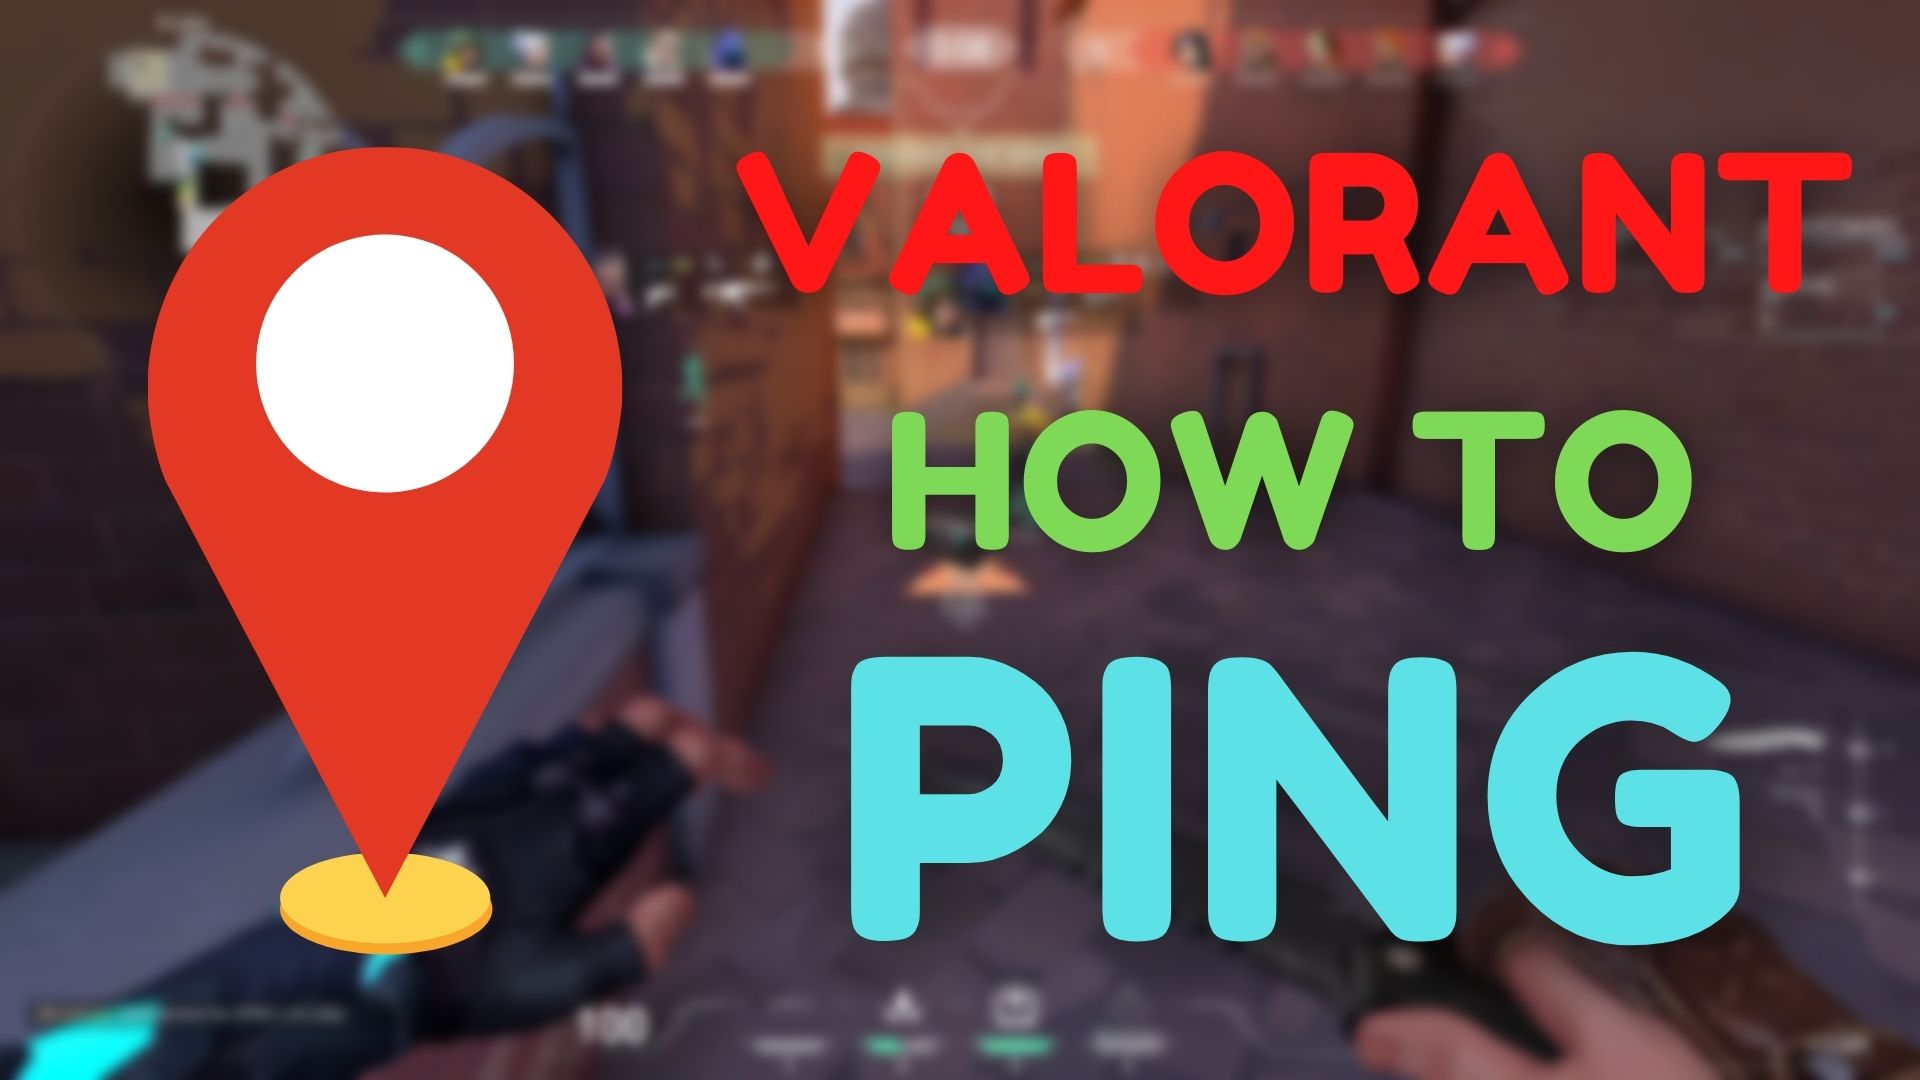 How to Ping Teammates in Valorant